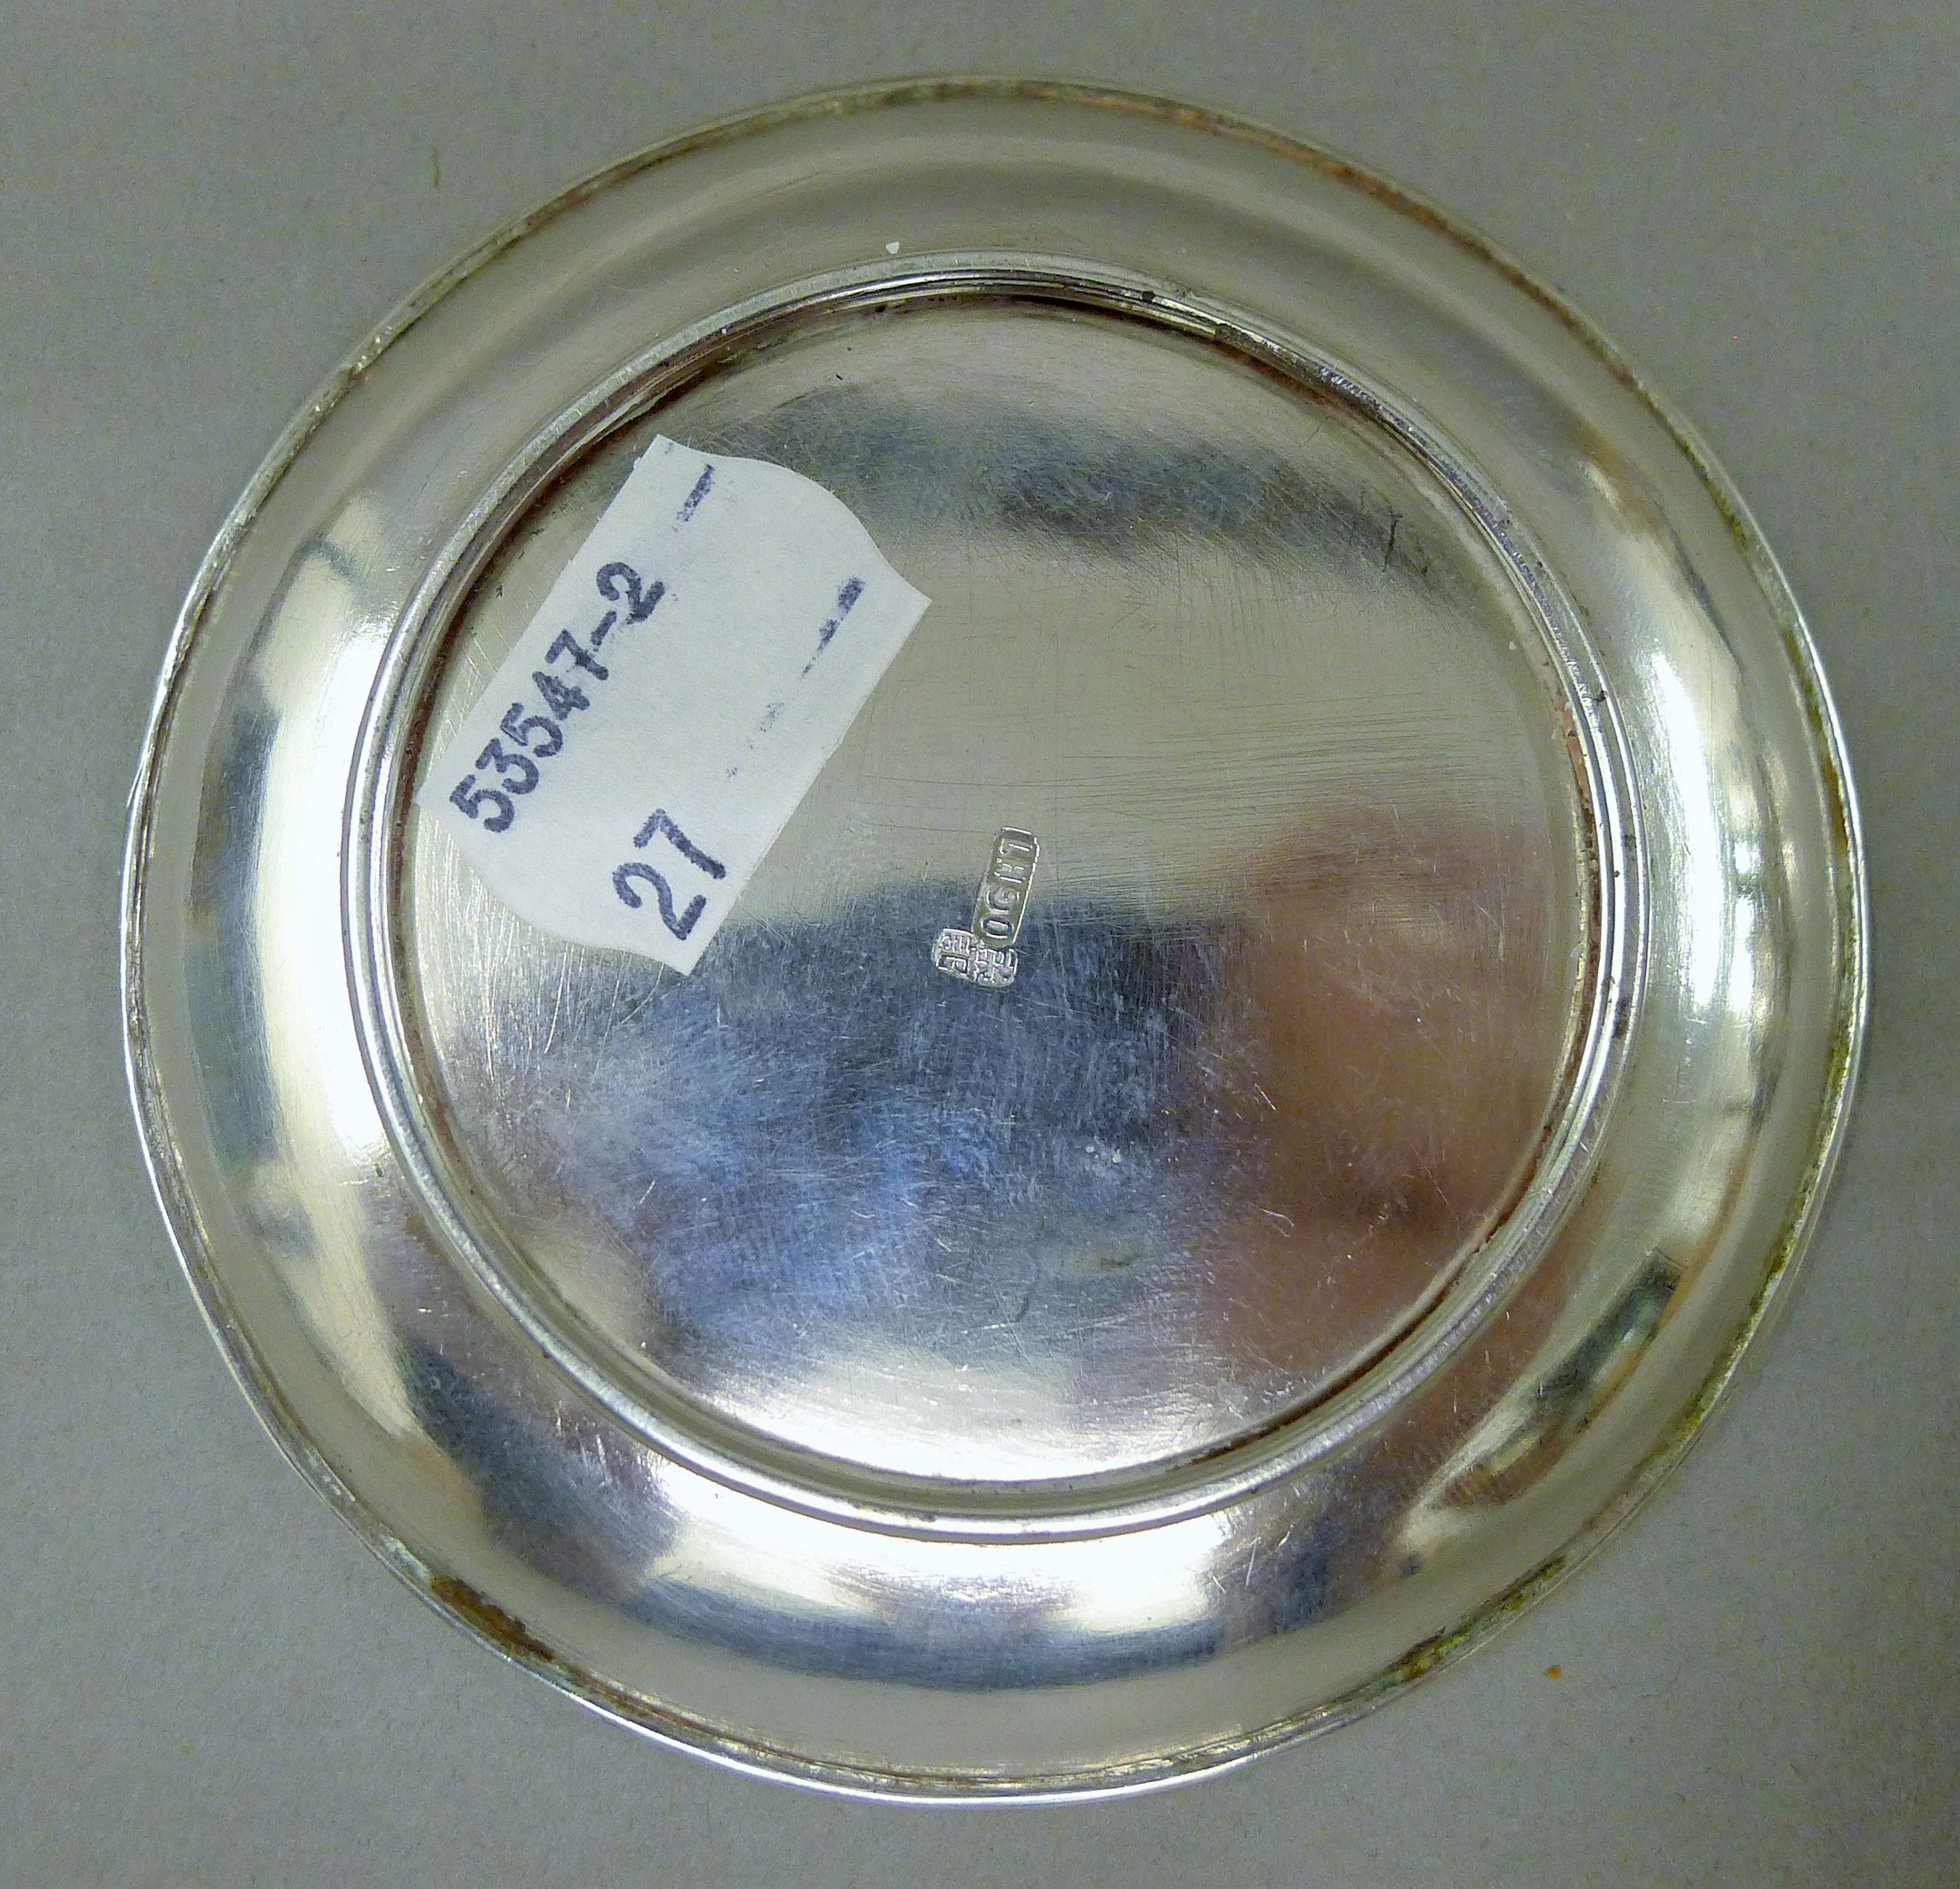 Two small Chinese silver dishes, one set with a coin. The largest 9 cm diameter. 88. - Image 6 of 7